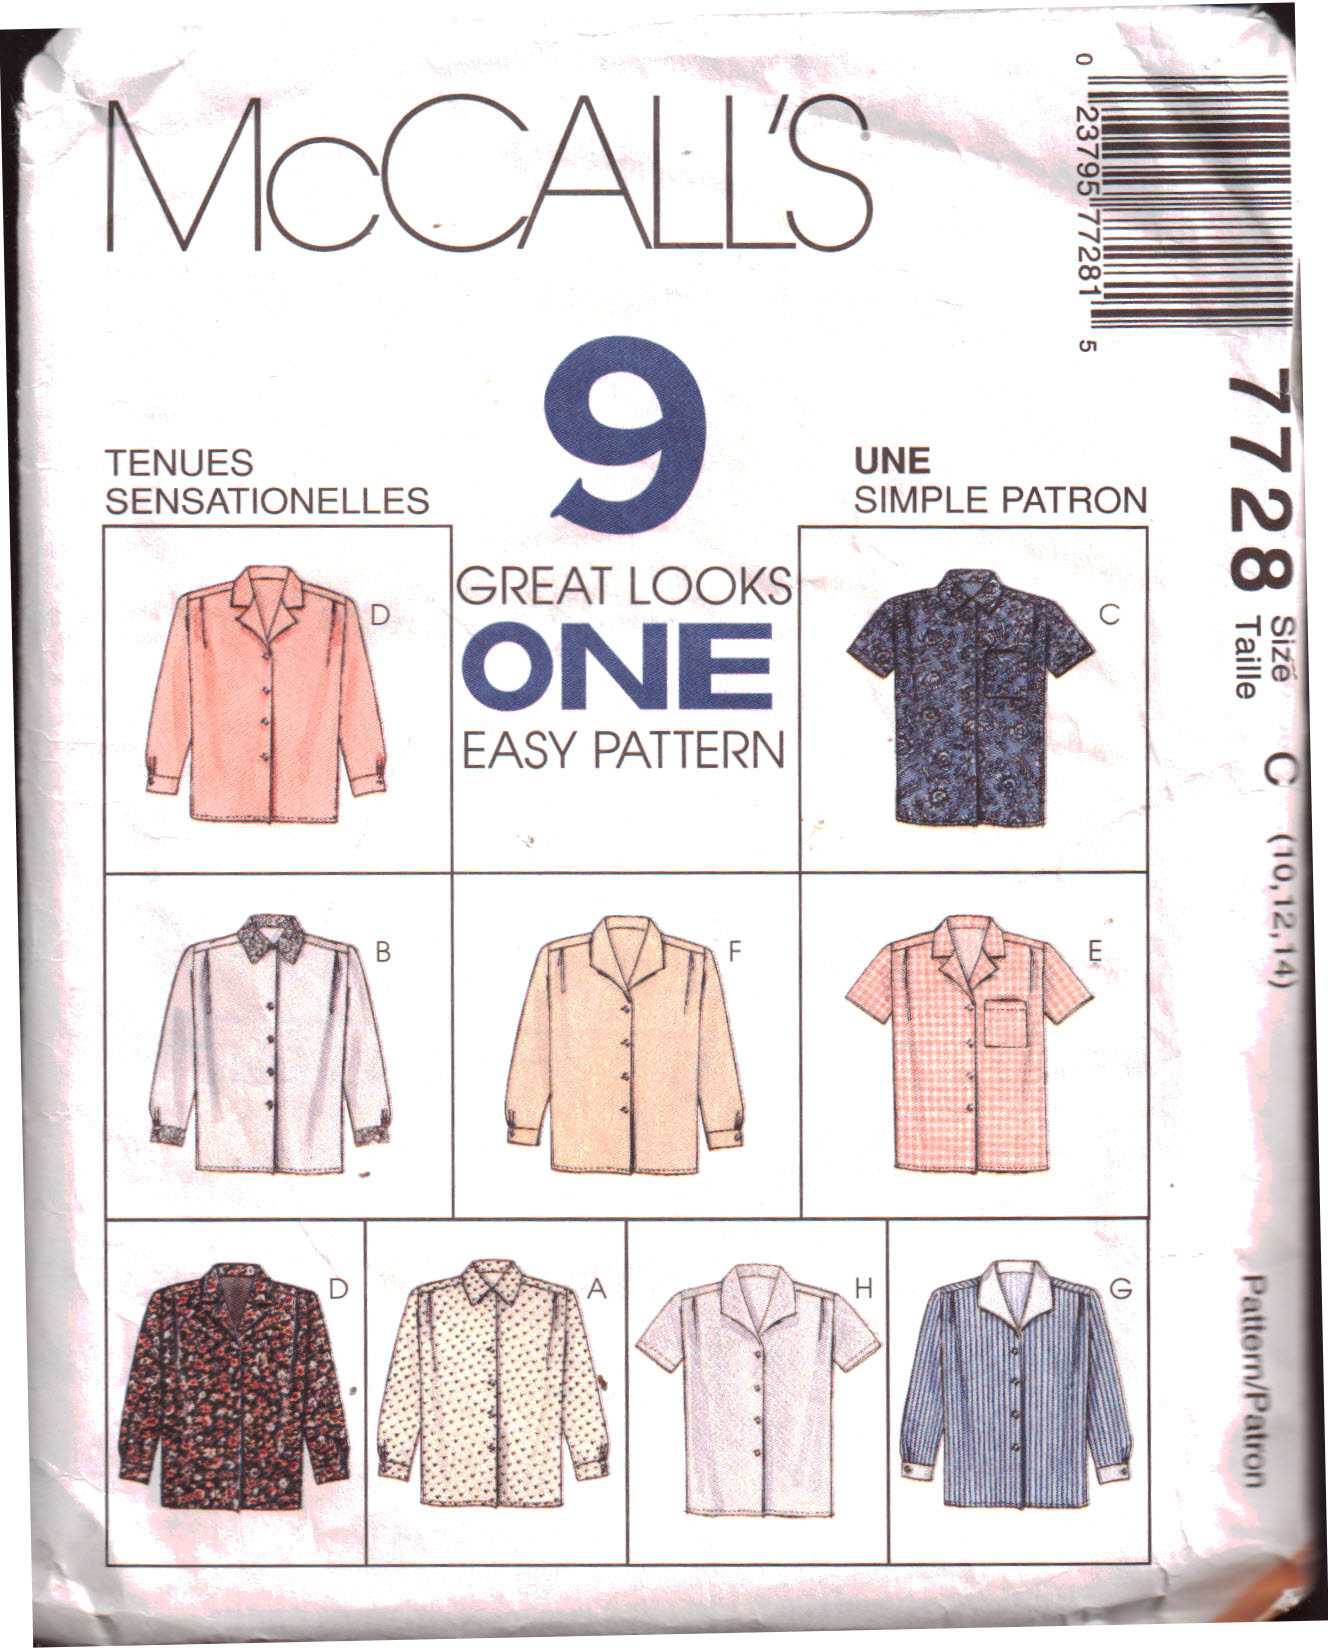 McCall's 7728 Blouses Size: C 10-12-14 Used Sewing Pattern